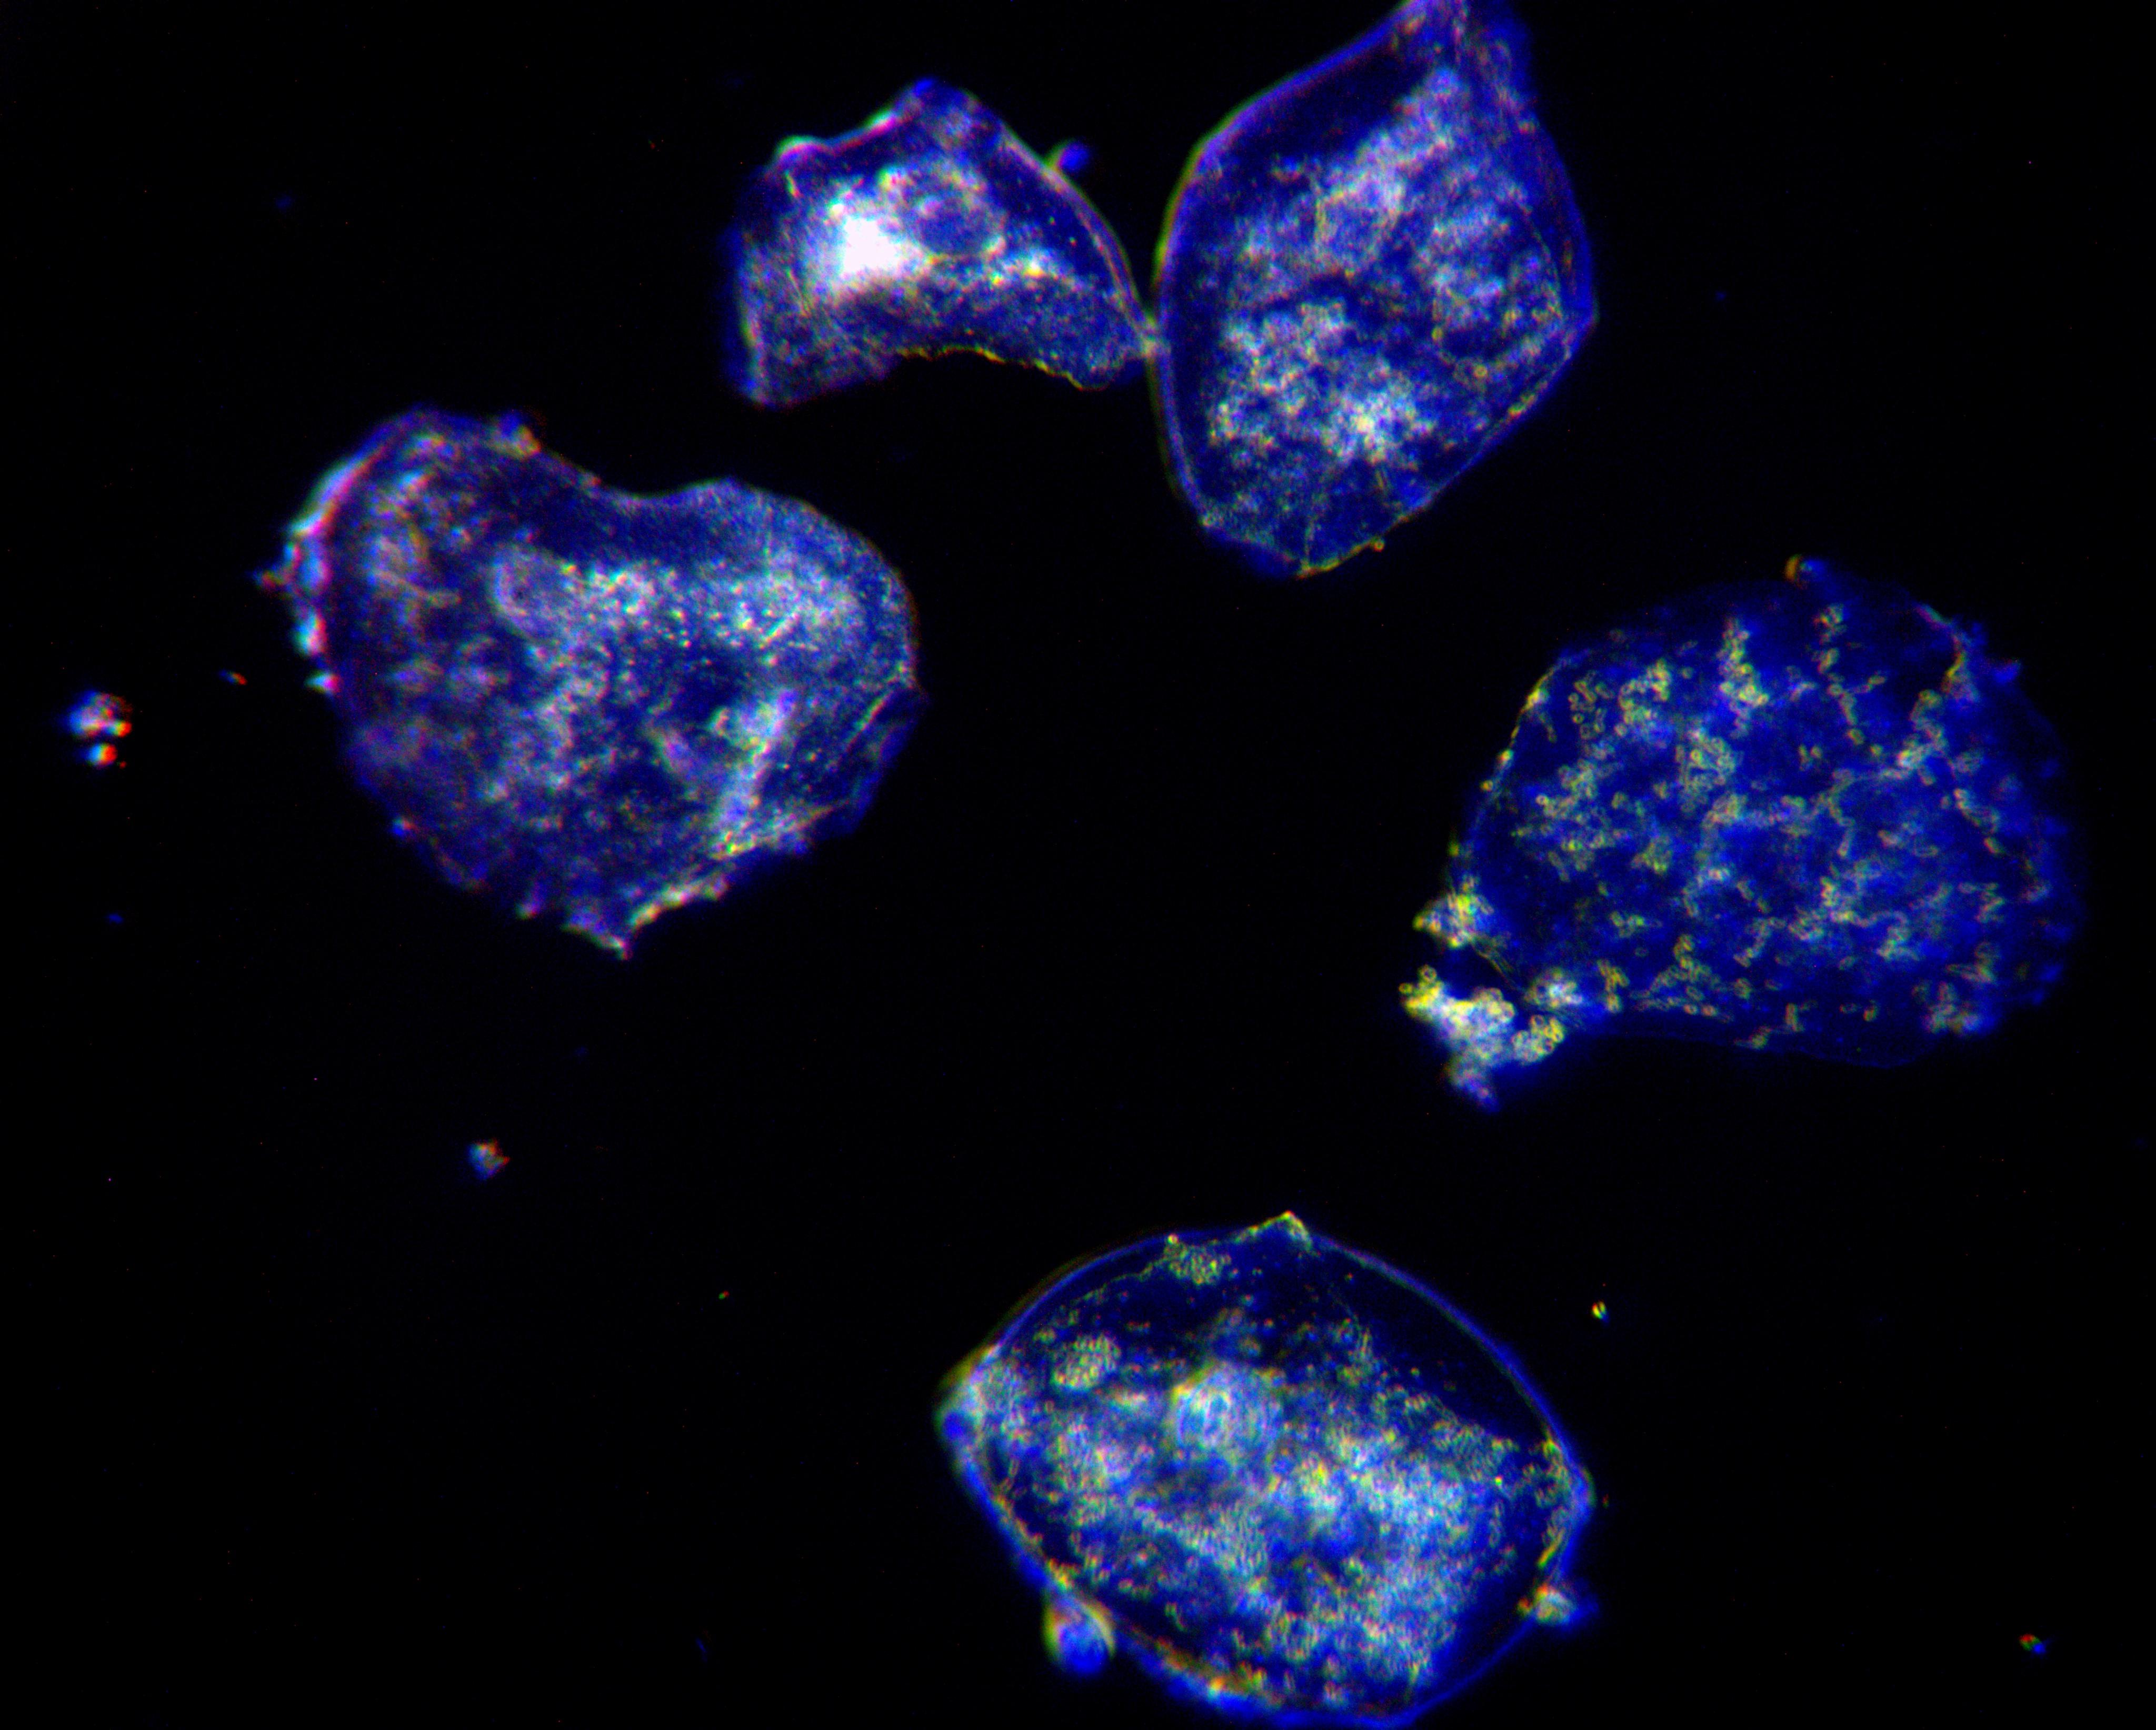 Human cheek cells viewed through an OMAX achromatic 40X NA0.65 160/0.17 objective lit through an OMAX dry darkfield NA0.7-0.9 condenser captured by an OMAX 14.0MP USB3.0 camera with 0.5X adapter